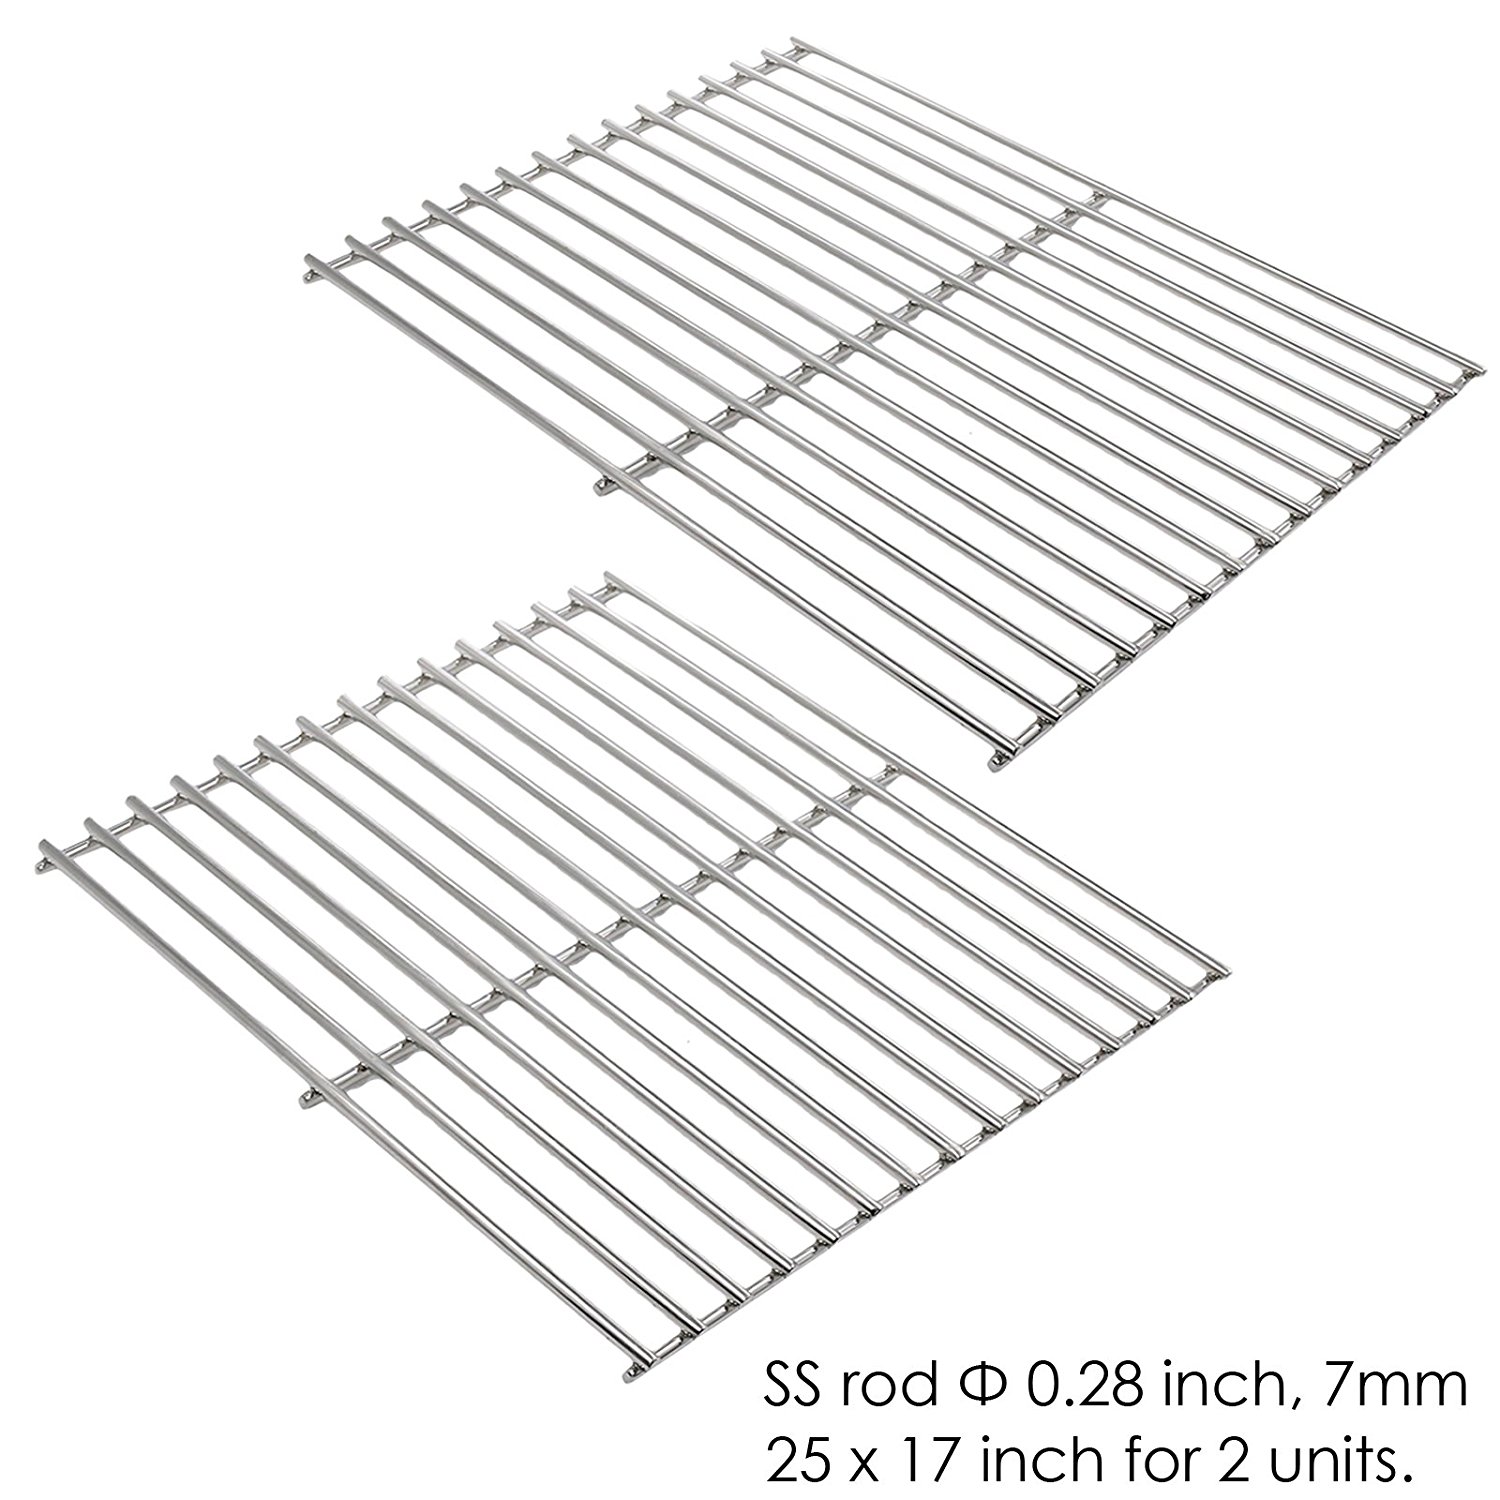 Pro Chef Ellipse Porcelain Coated Gas Grill Cooking Grates 22.75" x 16.5"  53502 